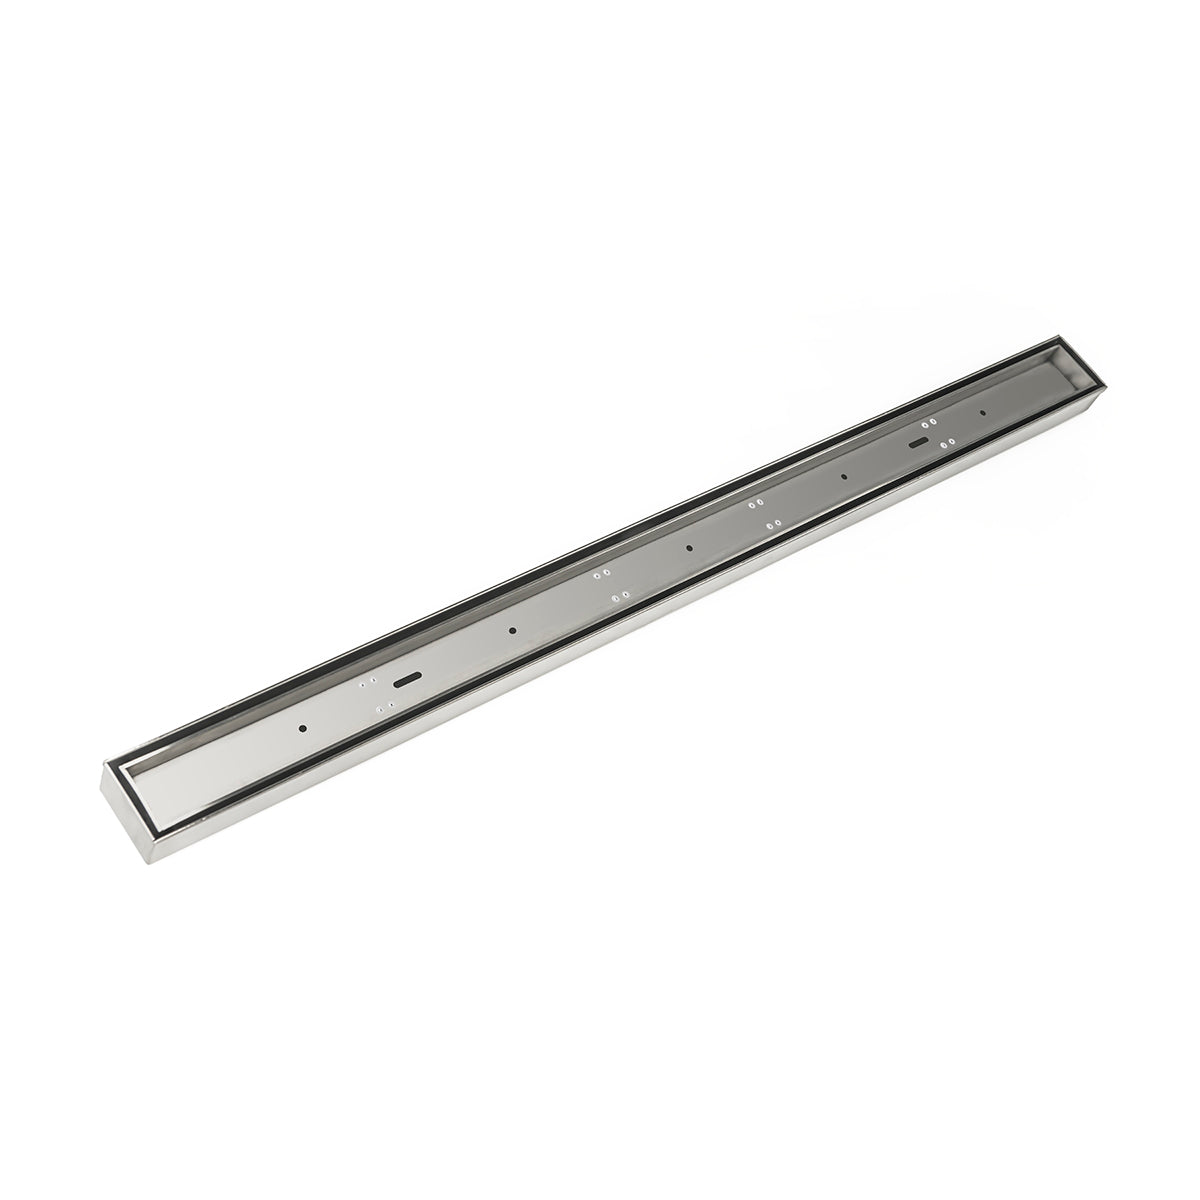 Infinity Drain 60" FX Low Profile Series Fixed Length Linear Drain Kit with Tile Insert Frame